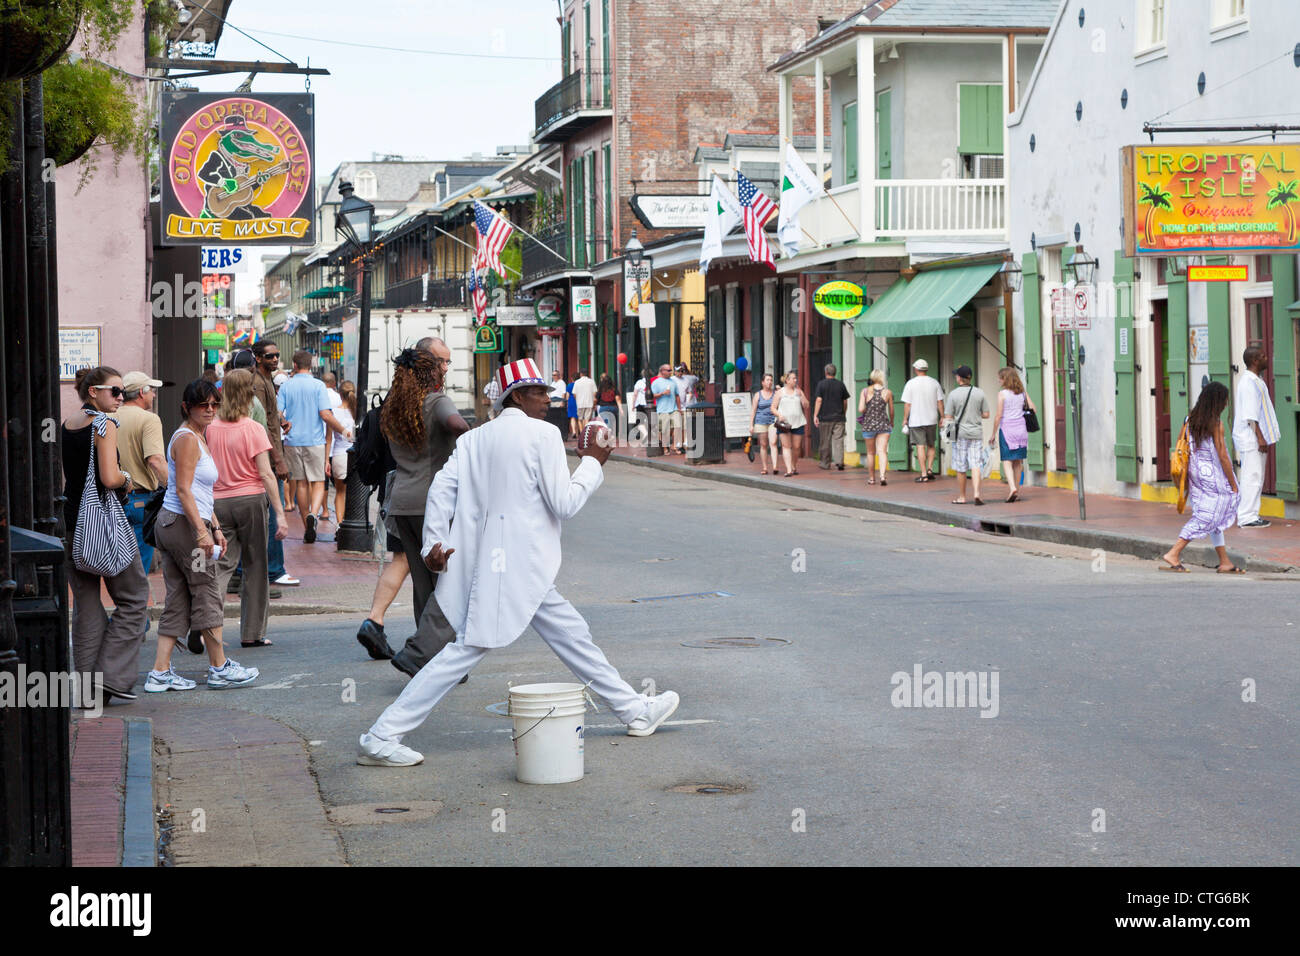 Black street performer in white tuxedo with football on Bourbon Street in the French Quarter of New Orleans, LA Stock Photo